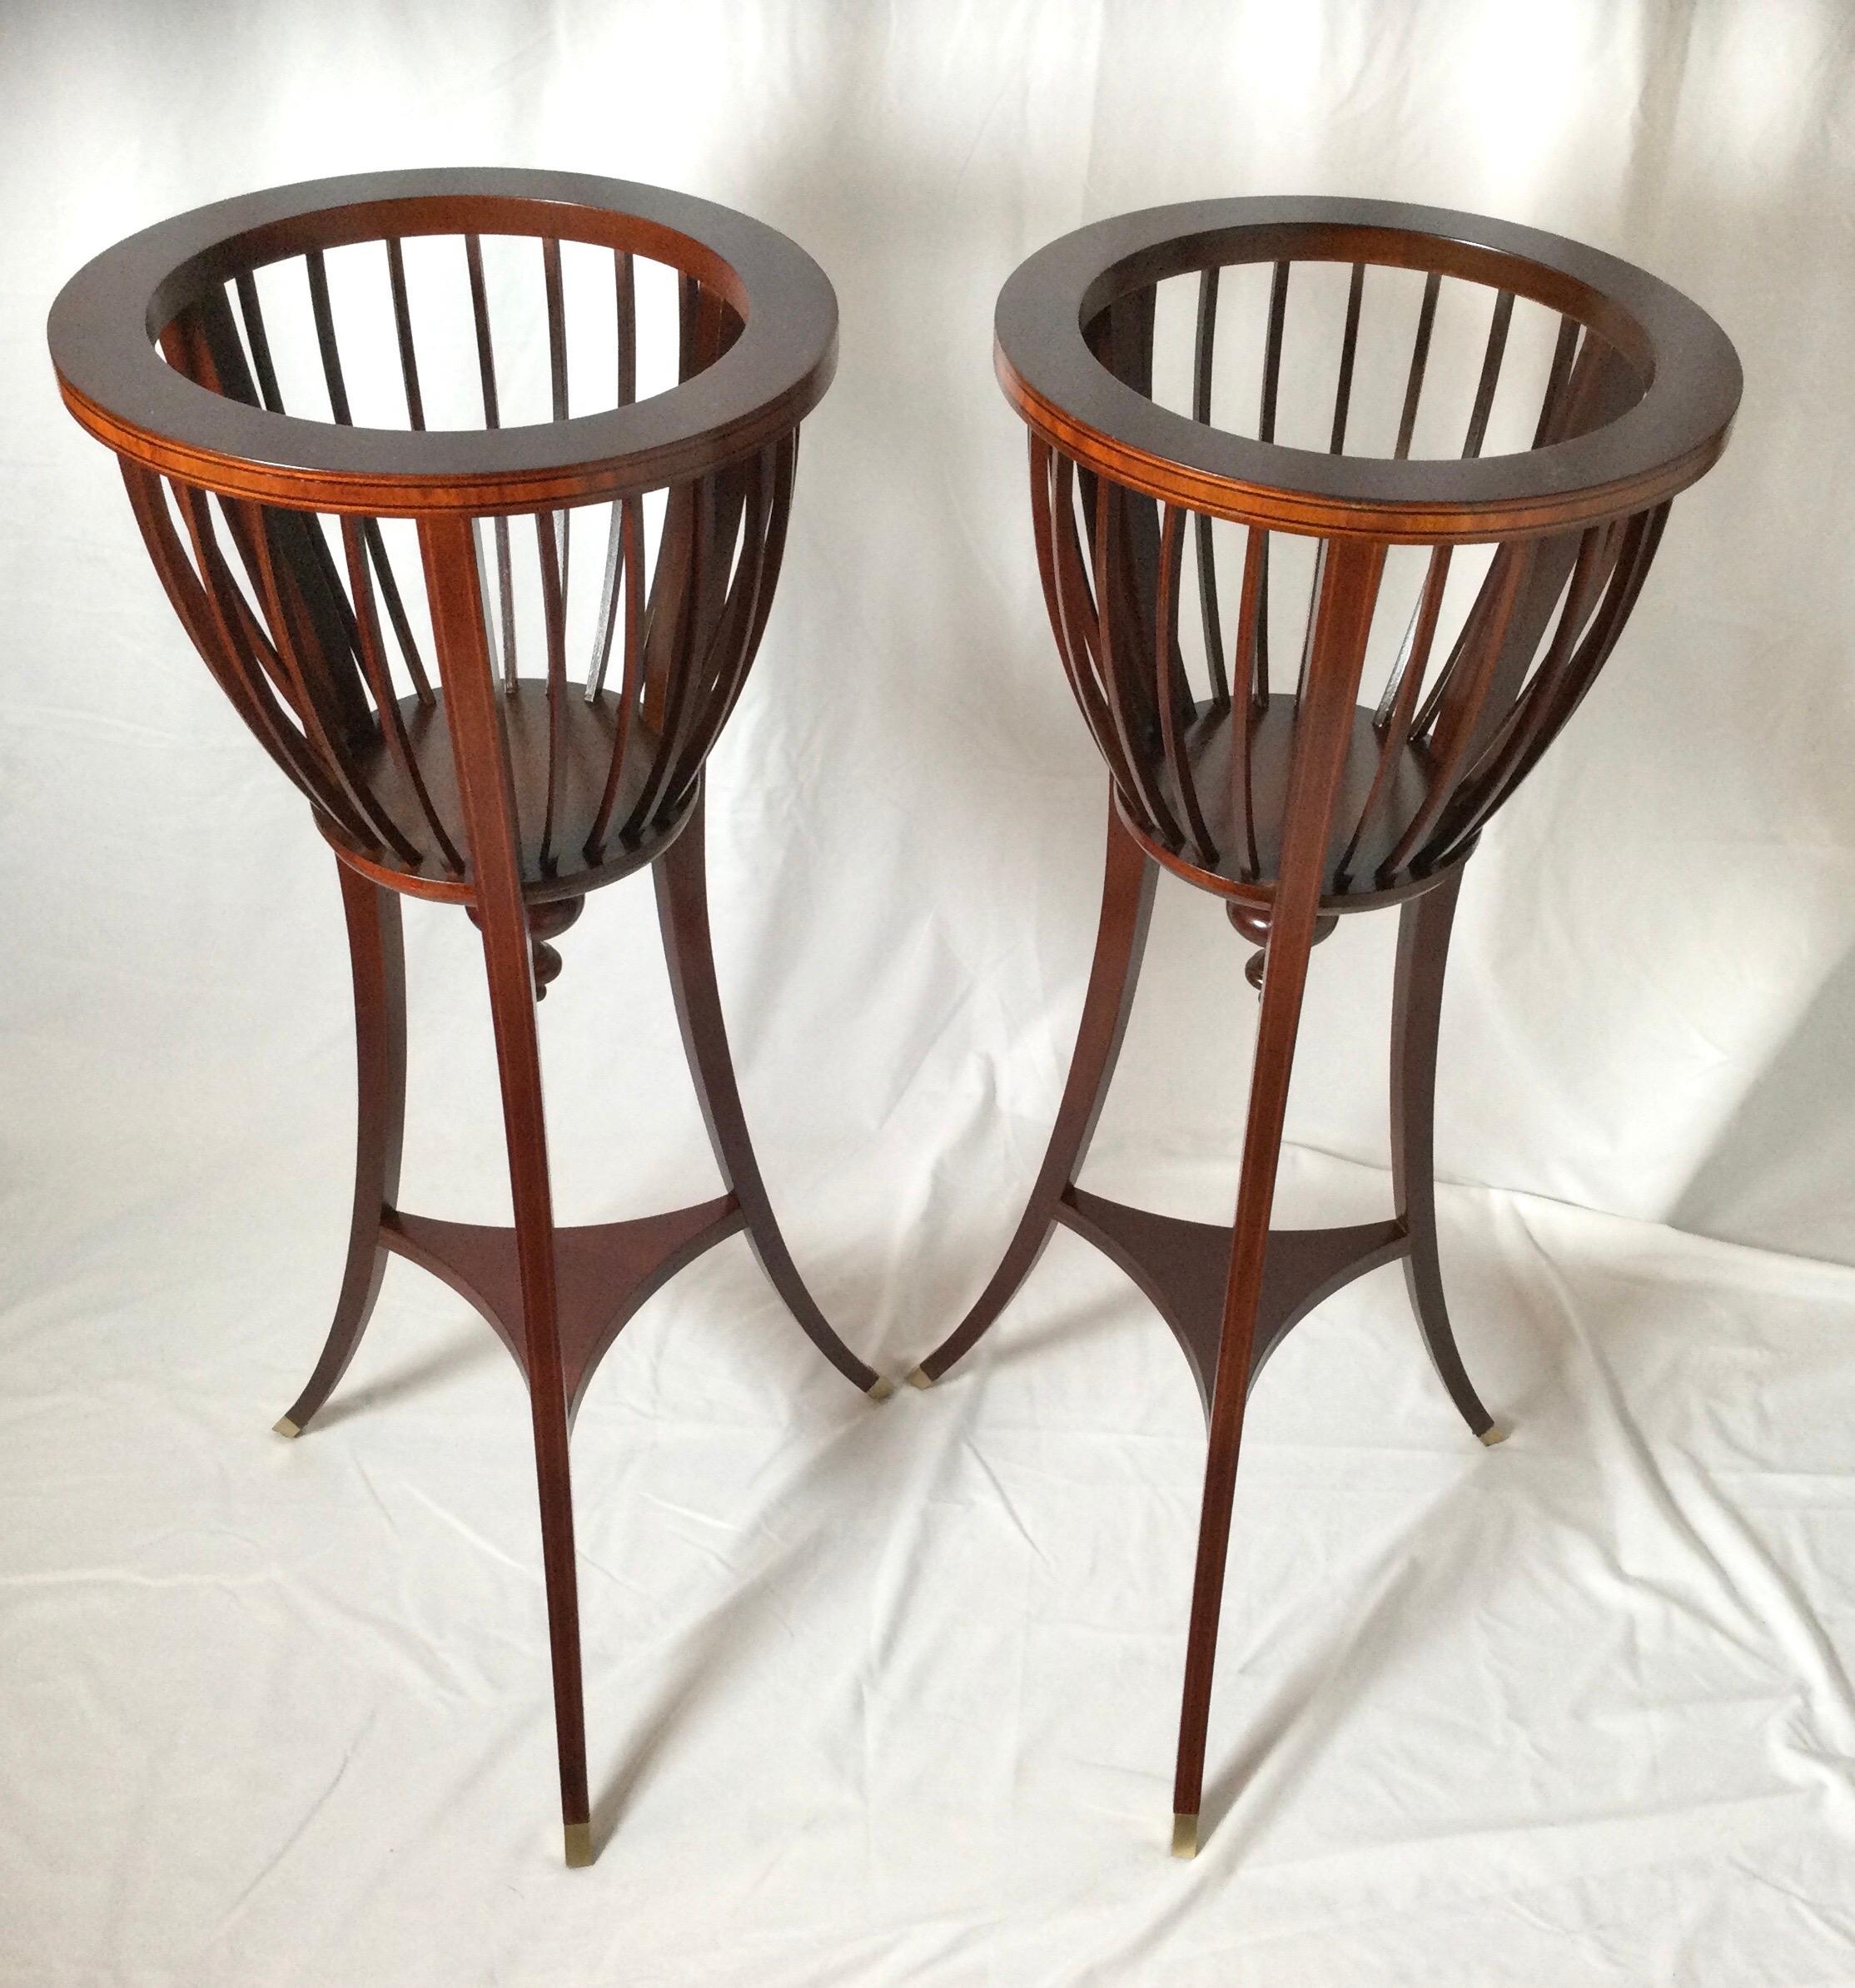 Elegant pair of Baker Charleston collection plant stands the upper spoked pant holders with graceful splayed legs with brass capped feet. The top rim and legs with a subtle pencil inlay.